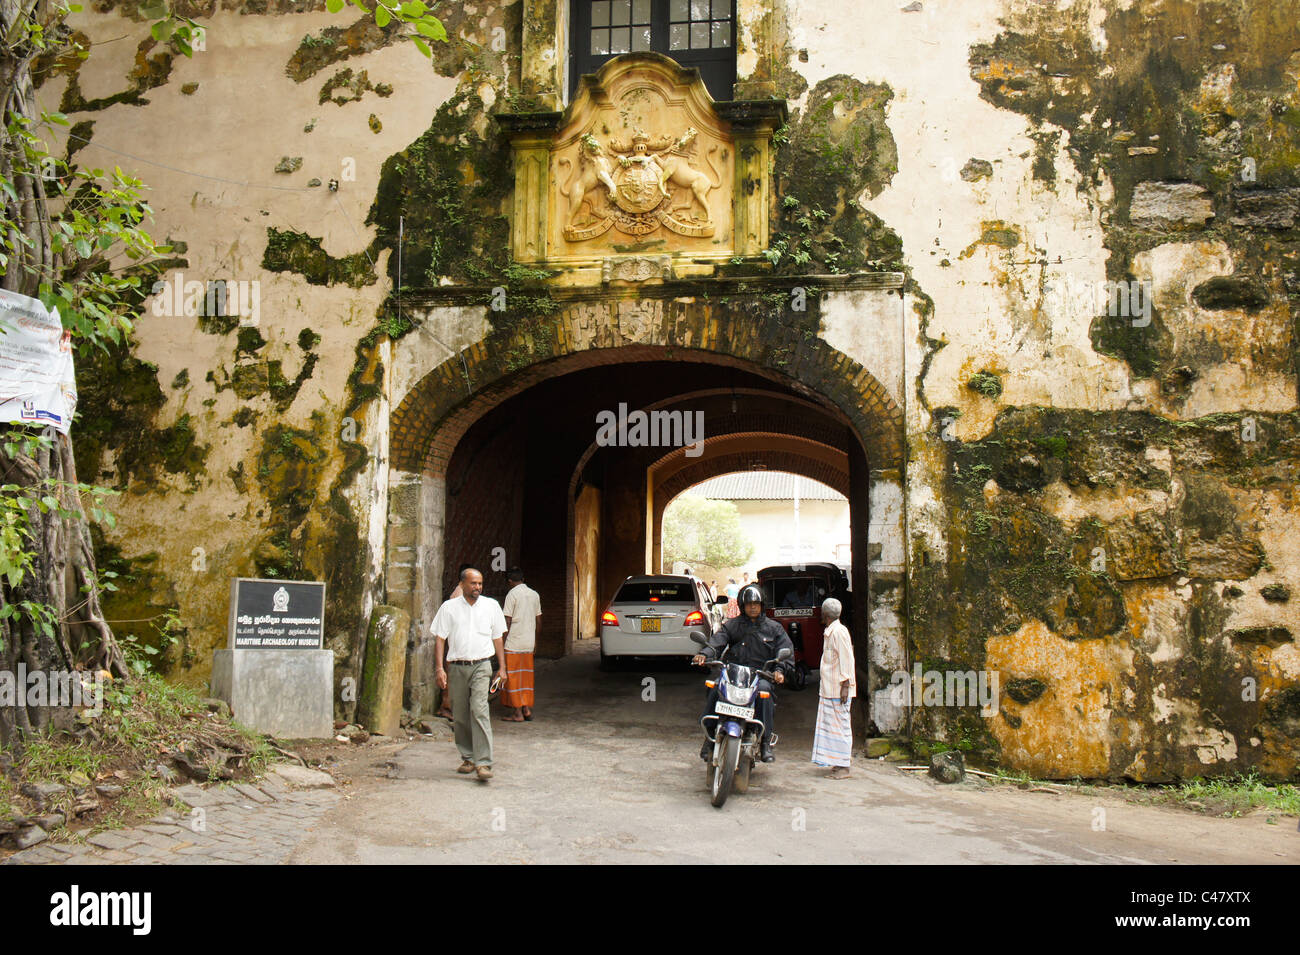 Old gate with the Royal coat of arms of the United Kingdom , entrance gate to the historic Fort in Galle, Sri Lanka Stock Photo